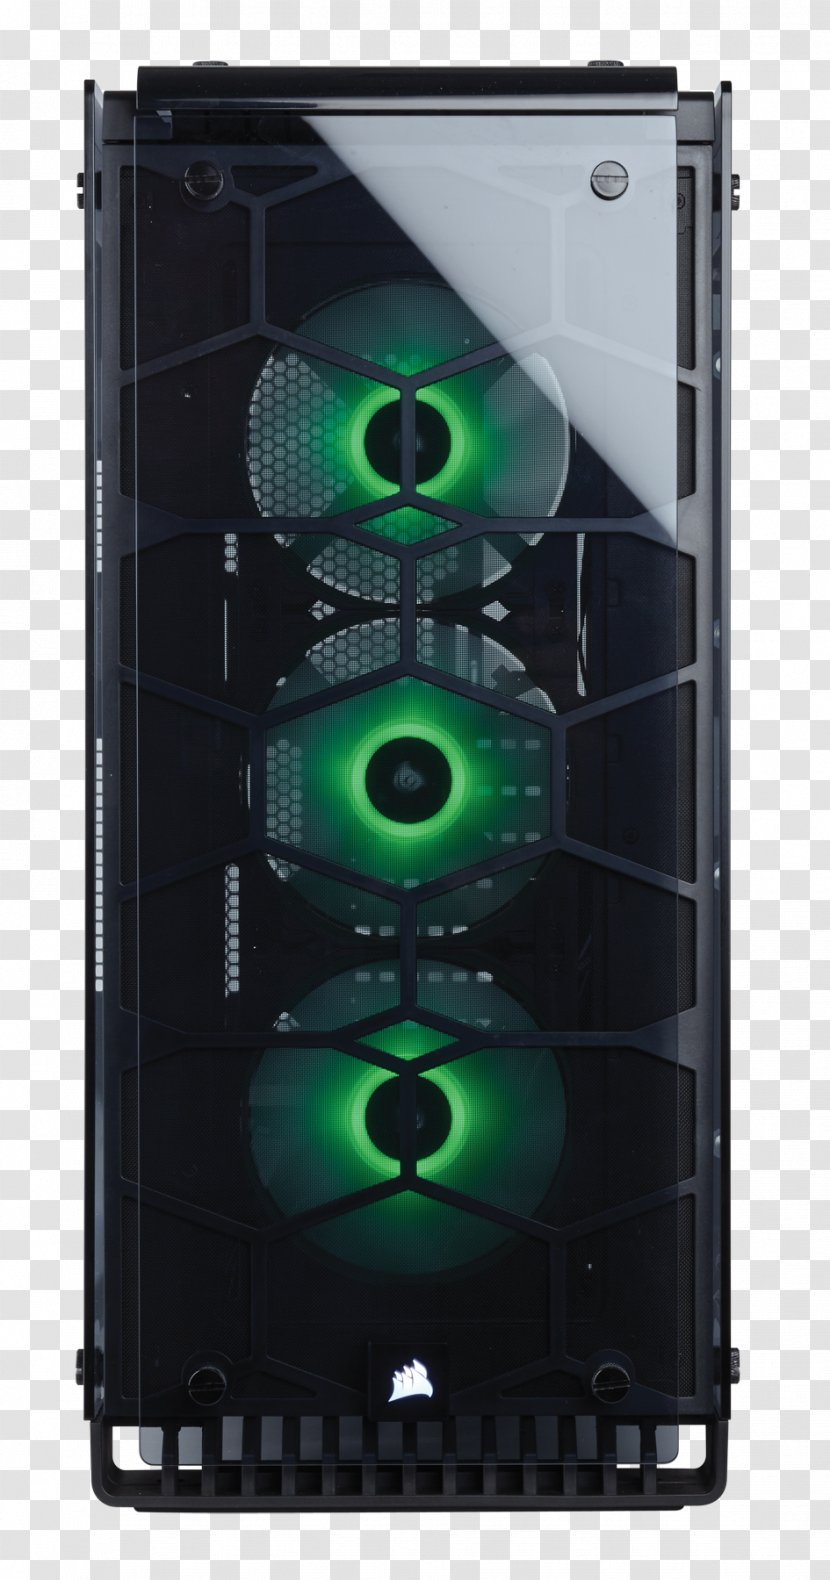 Computer Cases & Housings Power Supply Unit MicroATX Corsair Components - Rgb Color Model - Kl Tower Transparent PNG